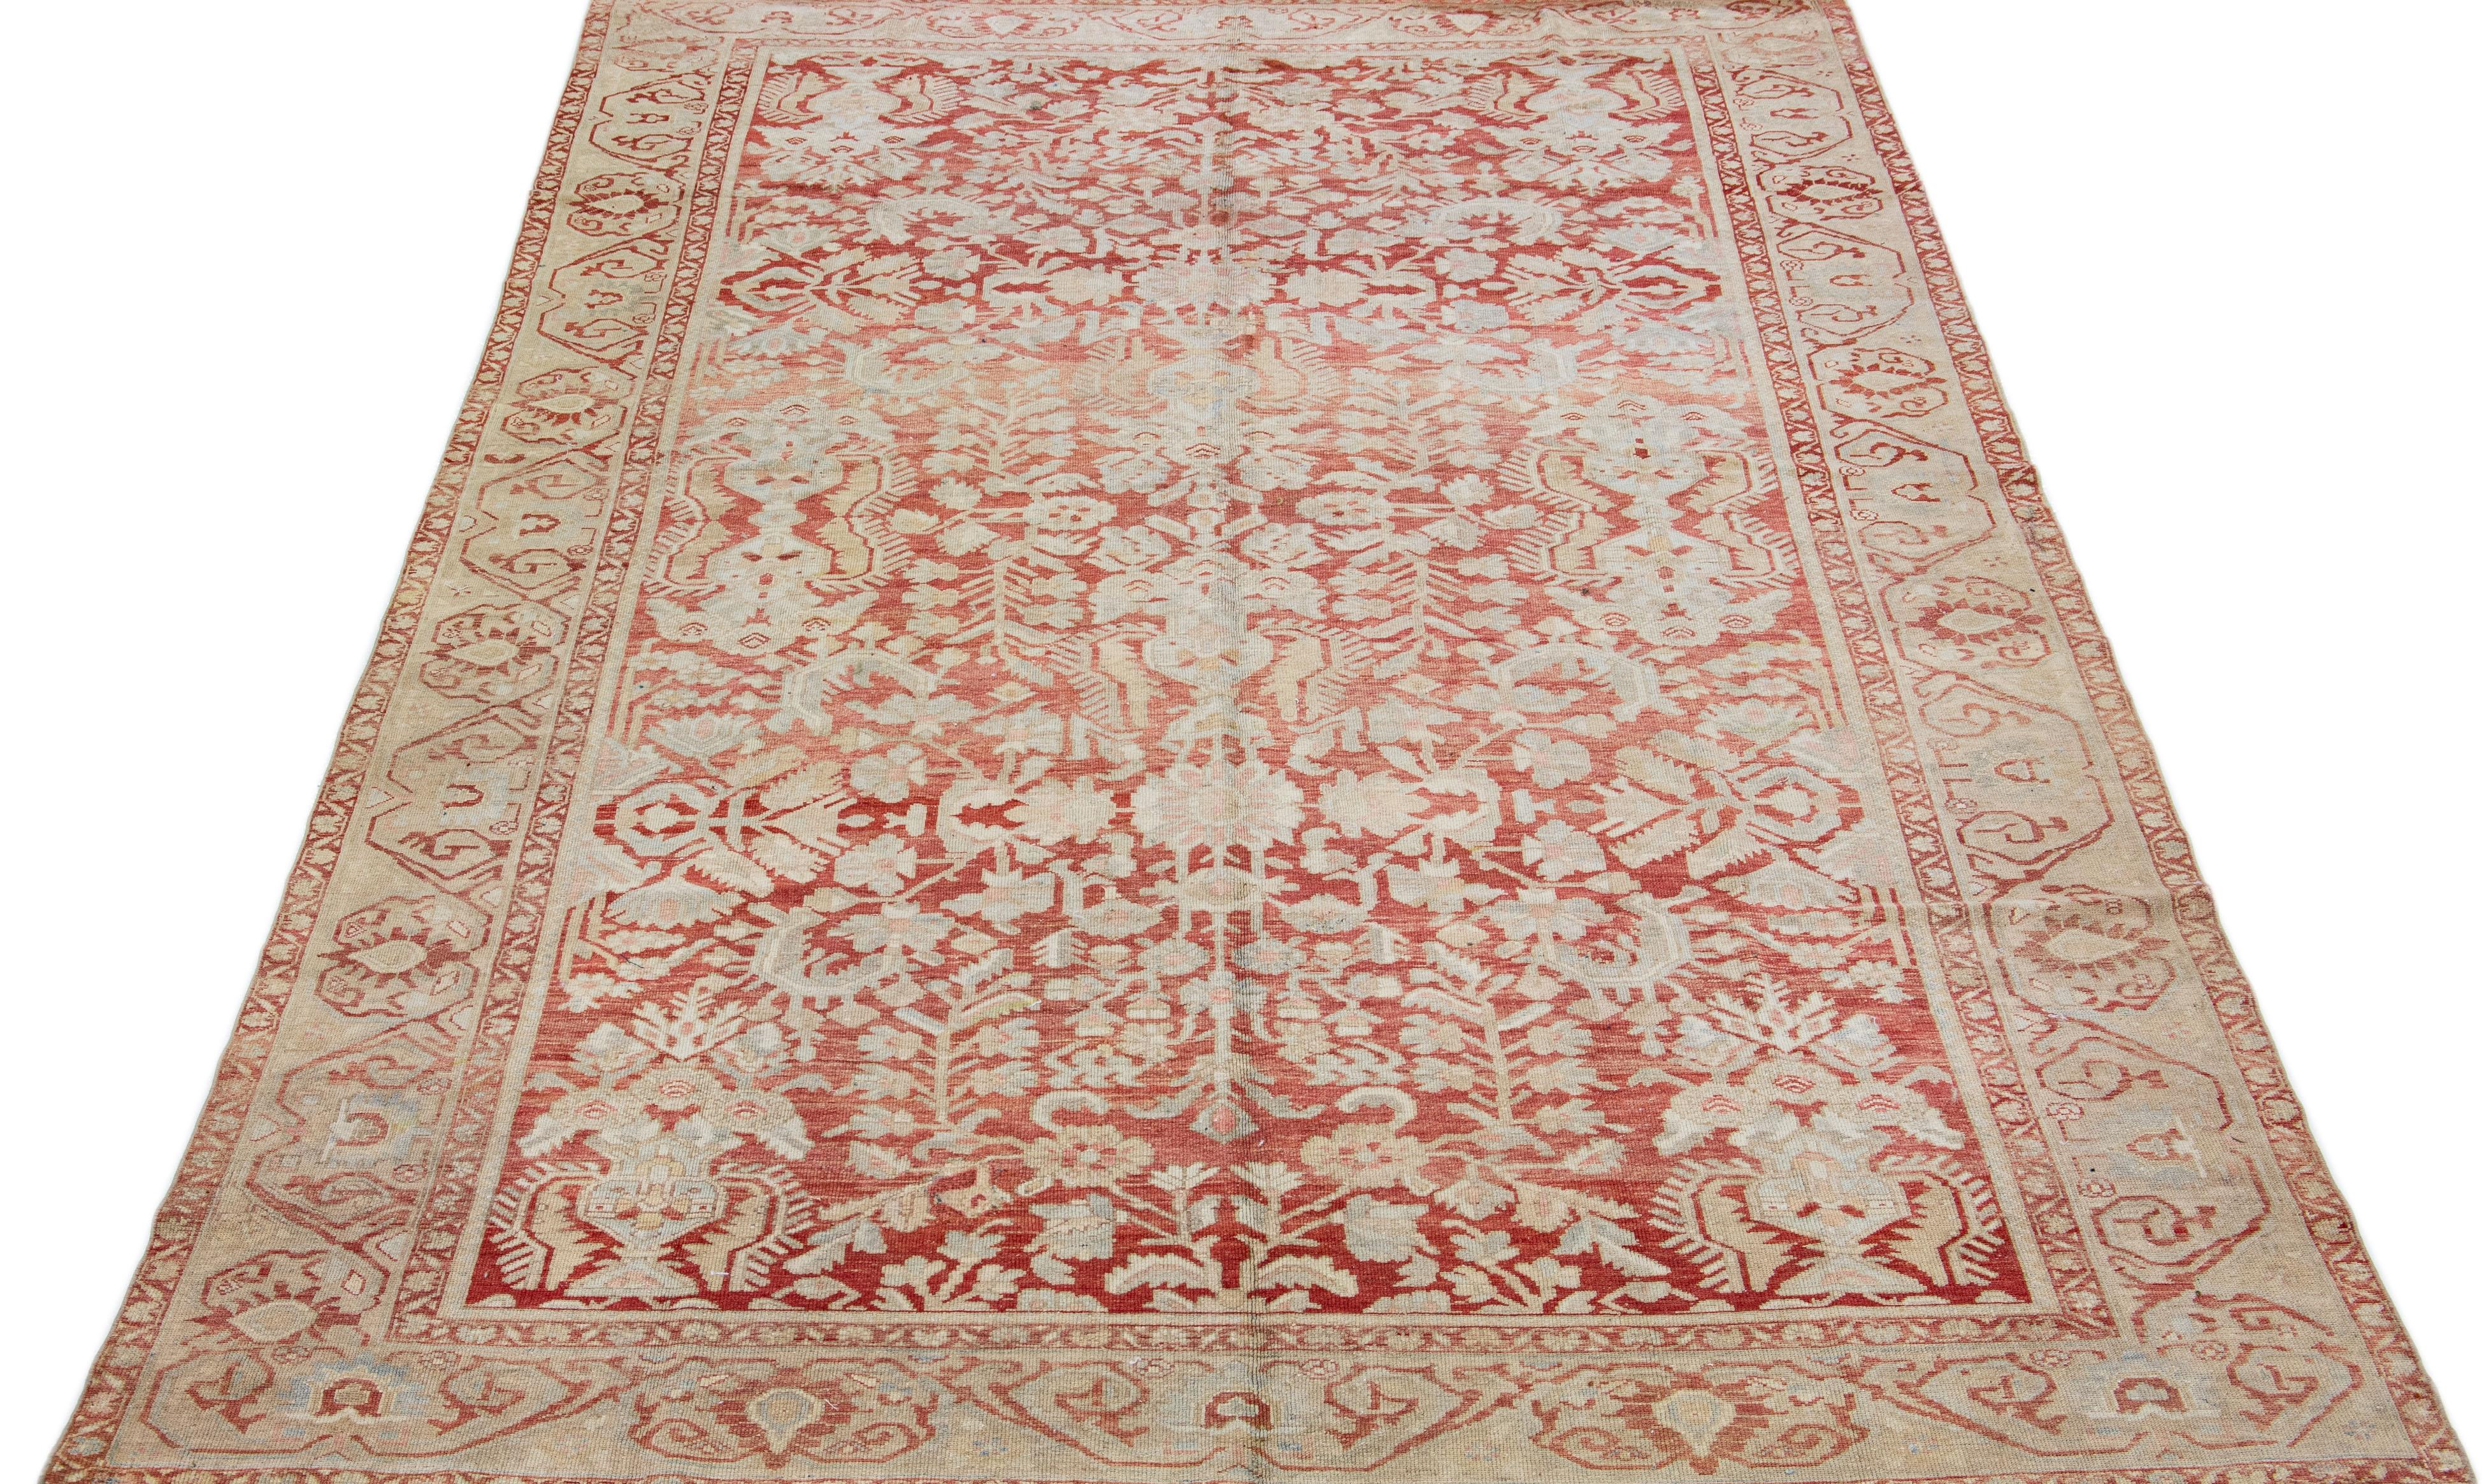 A beautiful Antique Malayer hand-knotted wool rug with a rust-red field. This Persian rug has beige and blue accents in an all-over floral design.

This rug measures 8'2